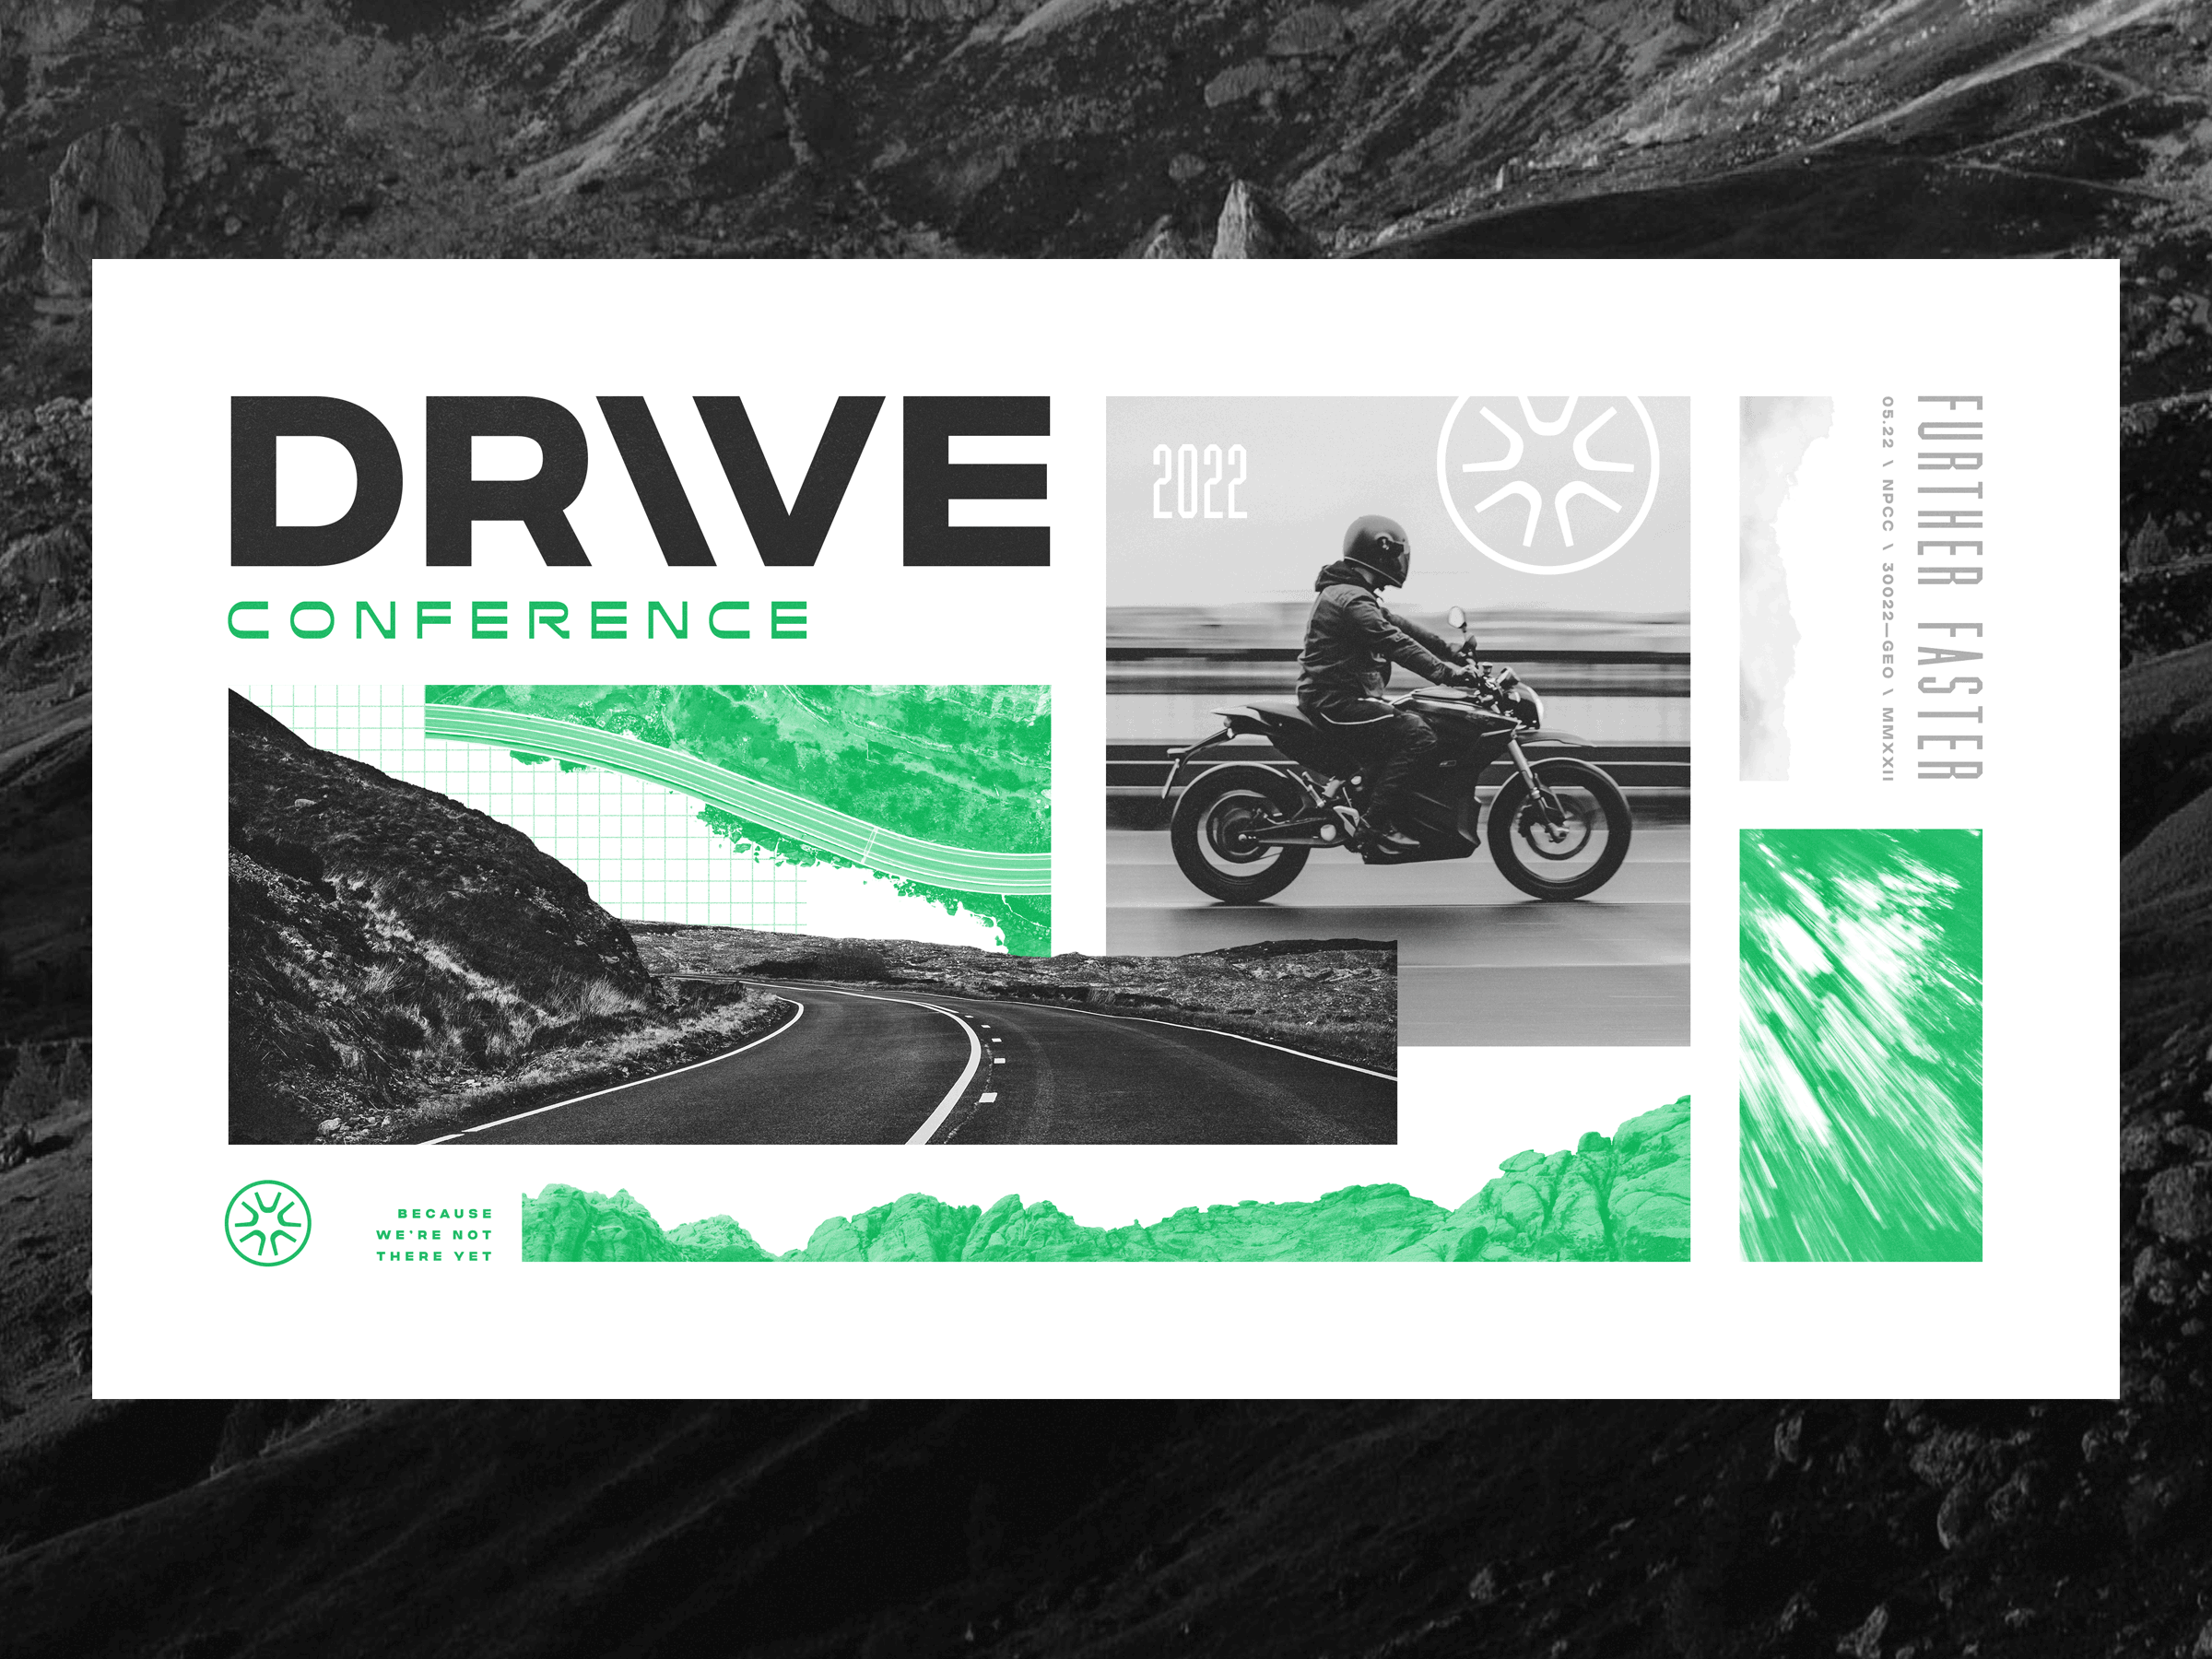 Drive Conference Key Art 2022 by Michael Stidham for North Point